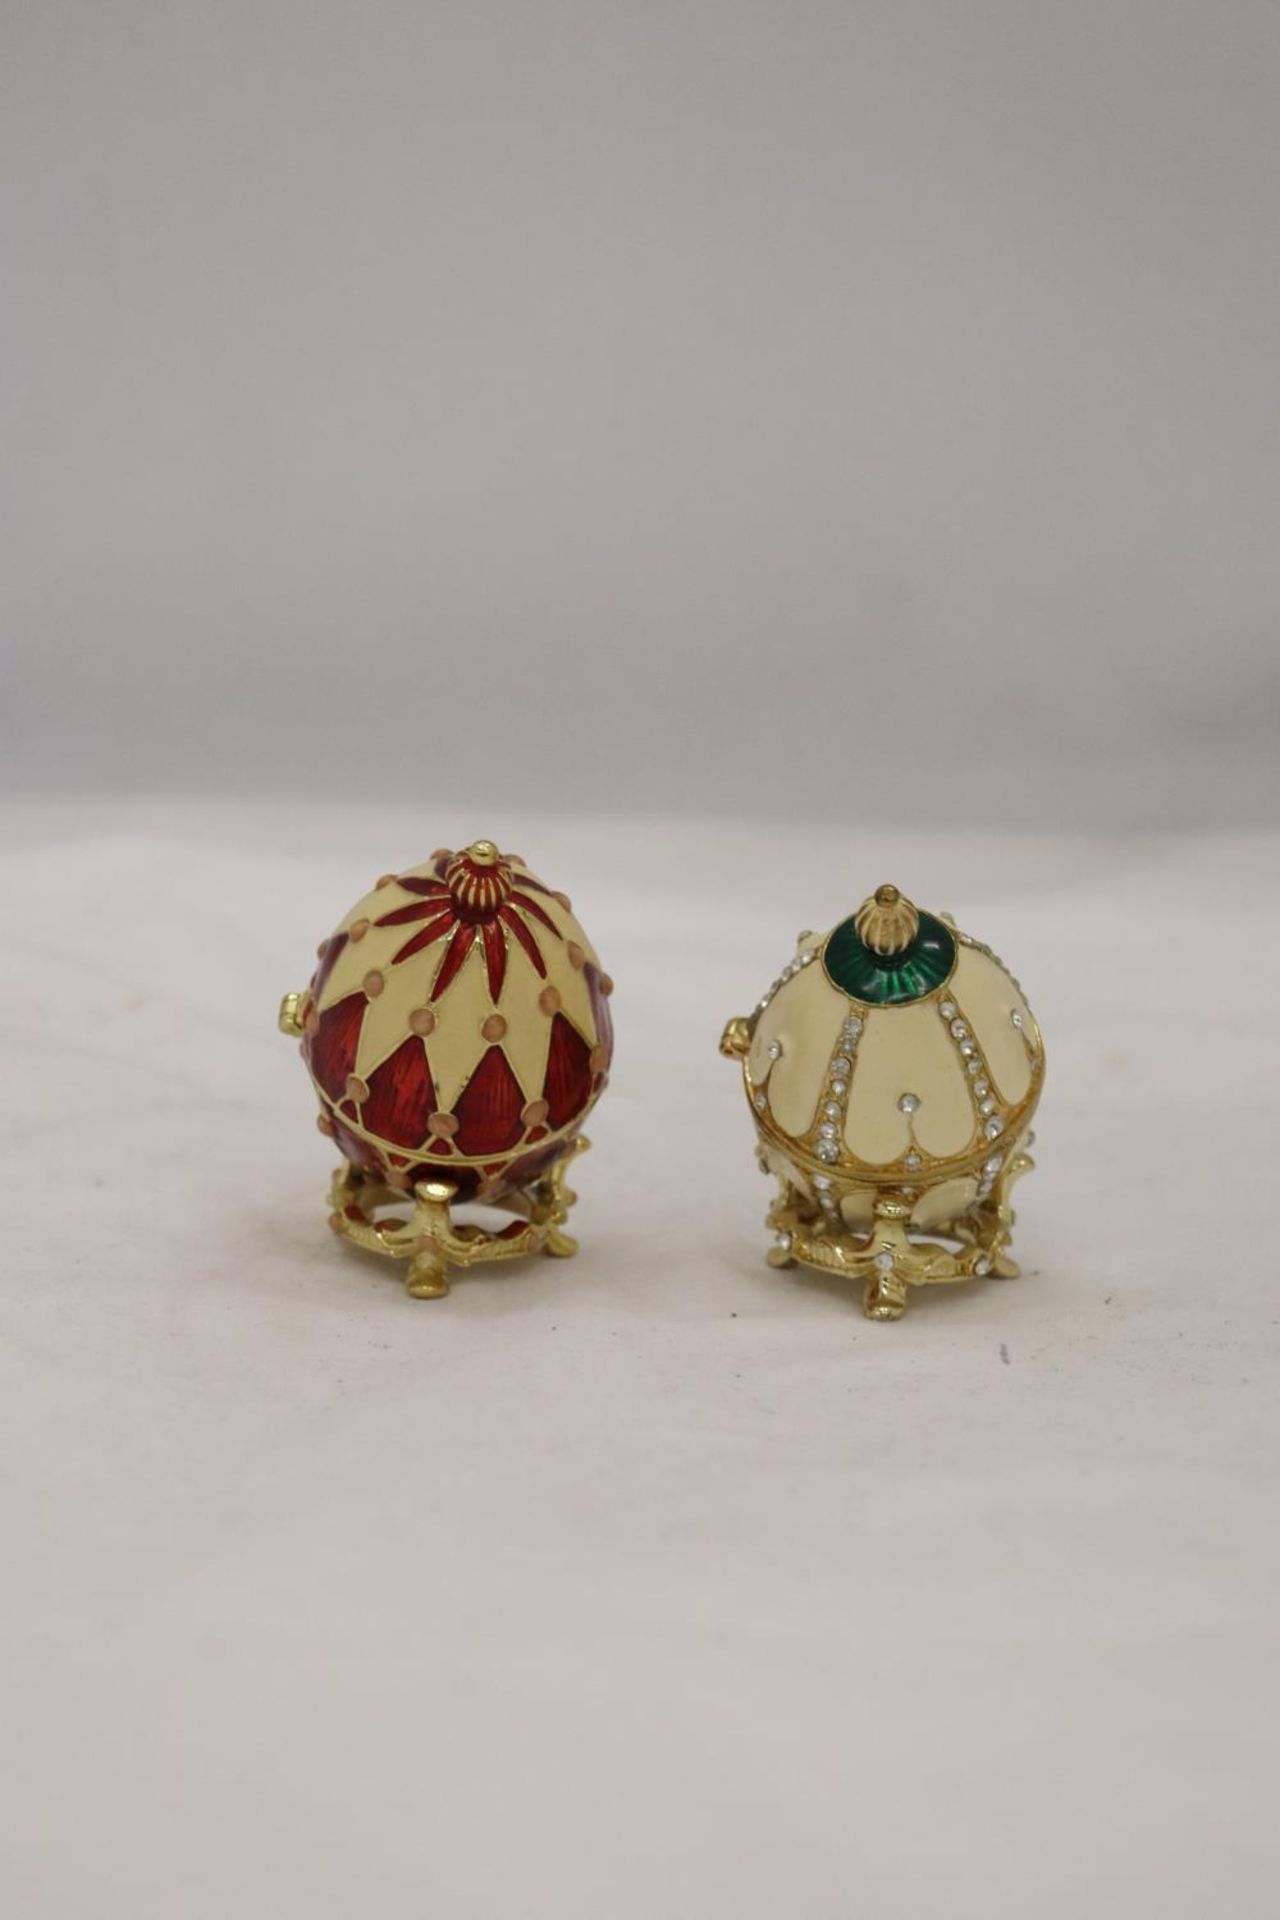 TWO DECORATIVE ENAMELLED EGG TRINKET BOXES ON STANDS - Image 3 of 6